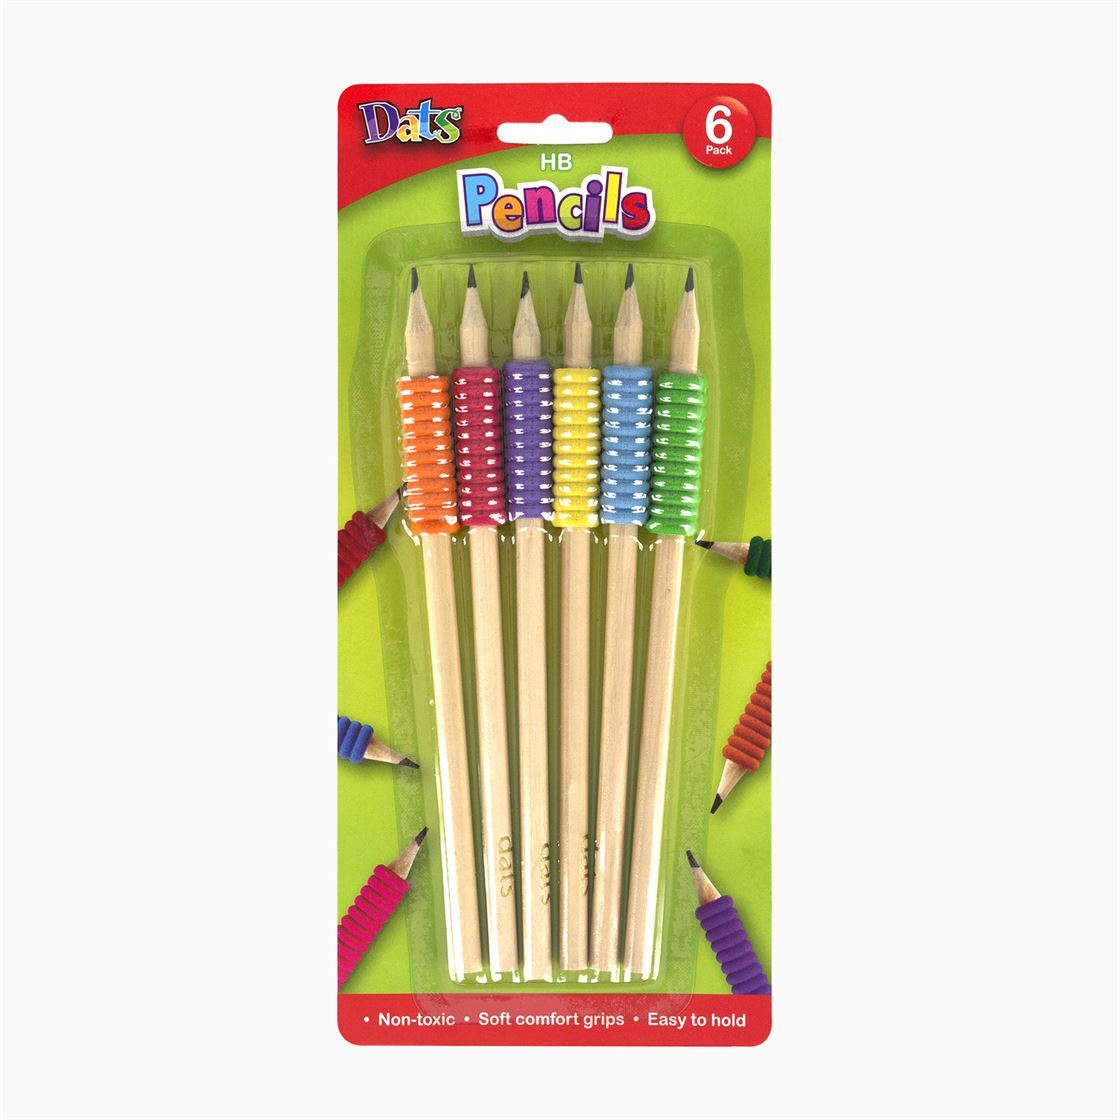 Dats HB Pencils with Soft Comfort Grip 6-Pack- main image